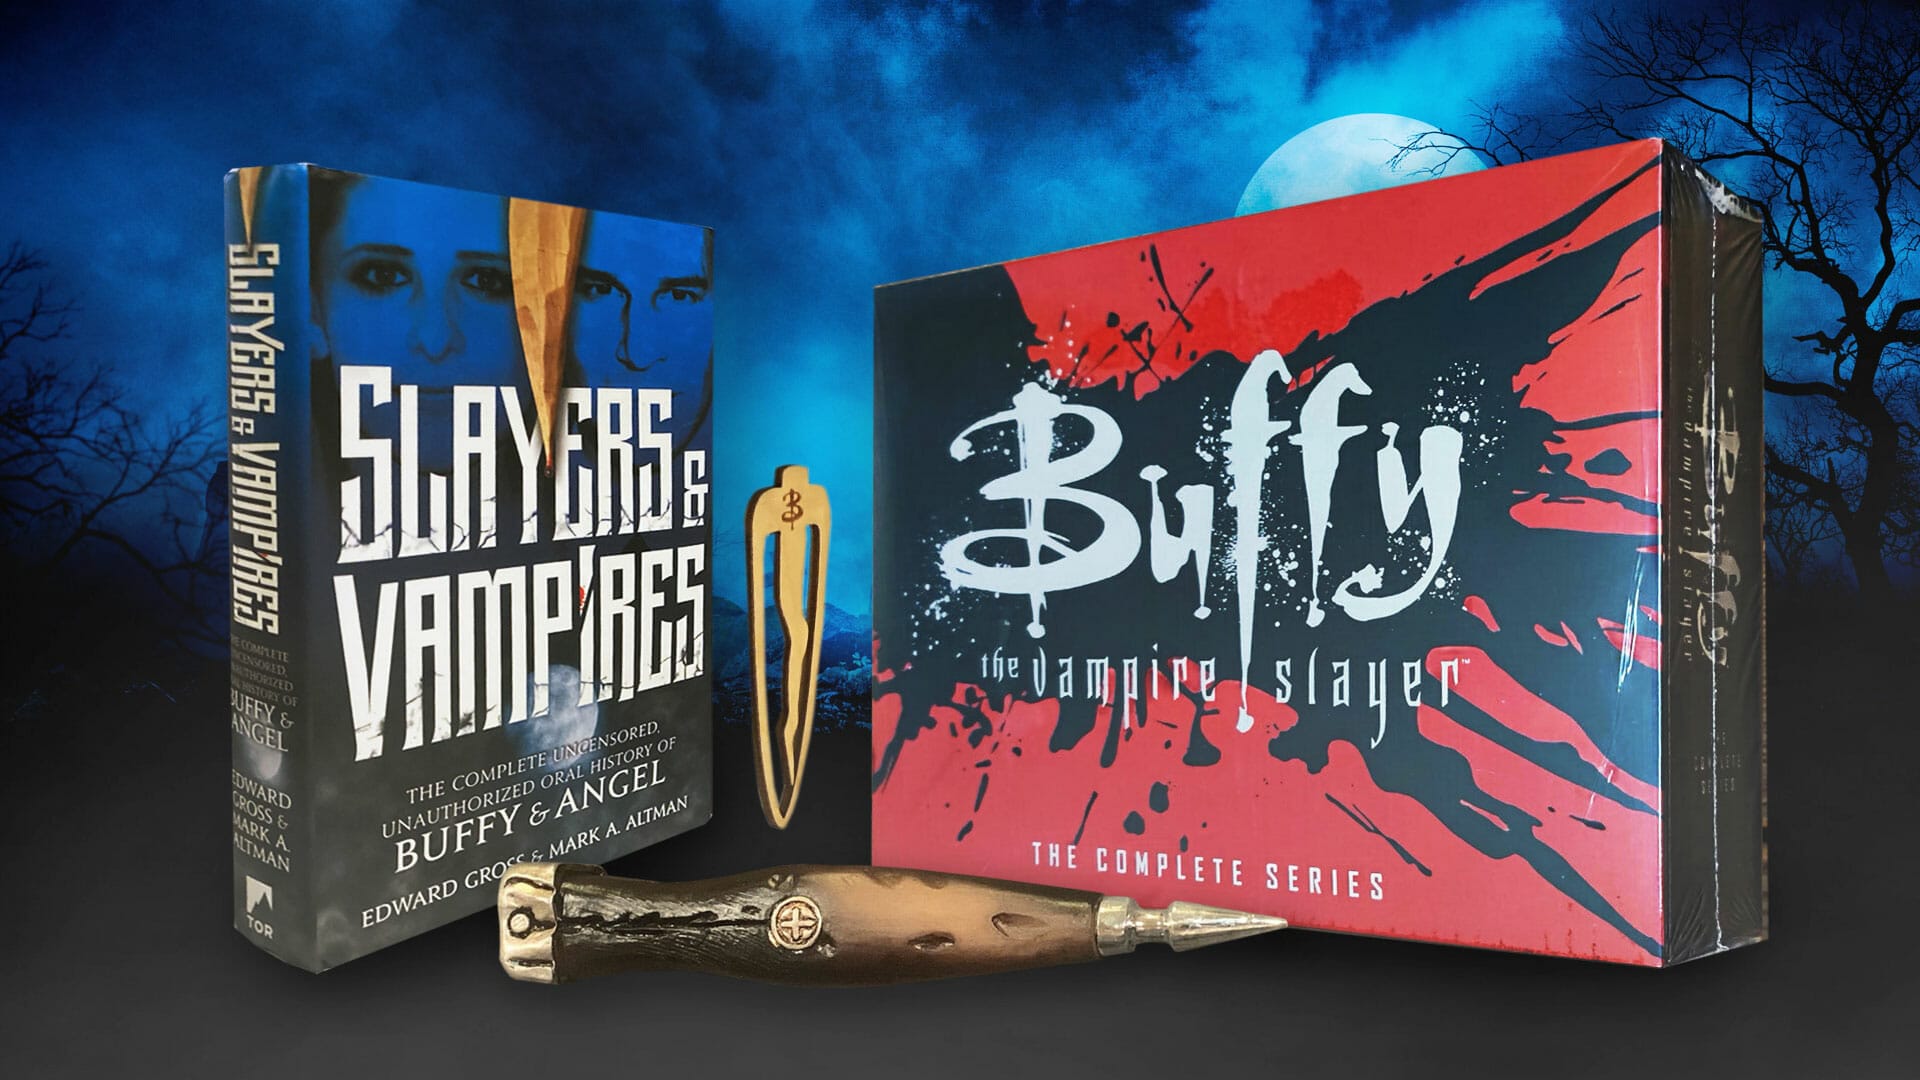 Book Slayers & Vampires, Mr. Pointy bookmark, Buffy the Vampire Slayer: The Complete Series, replica stake in front of a foggy graveyard at night